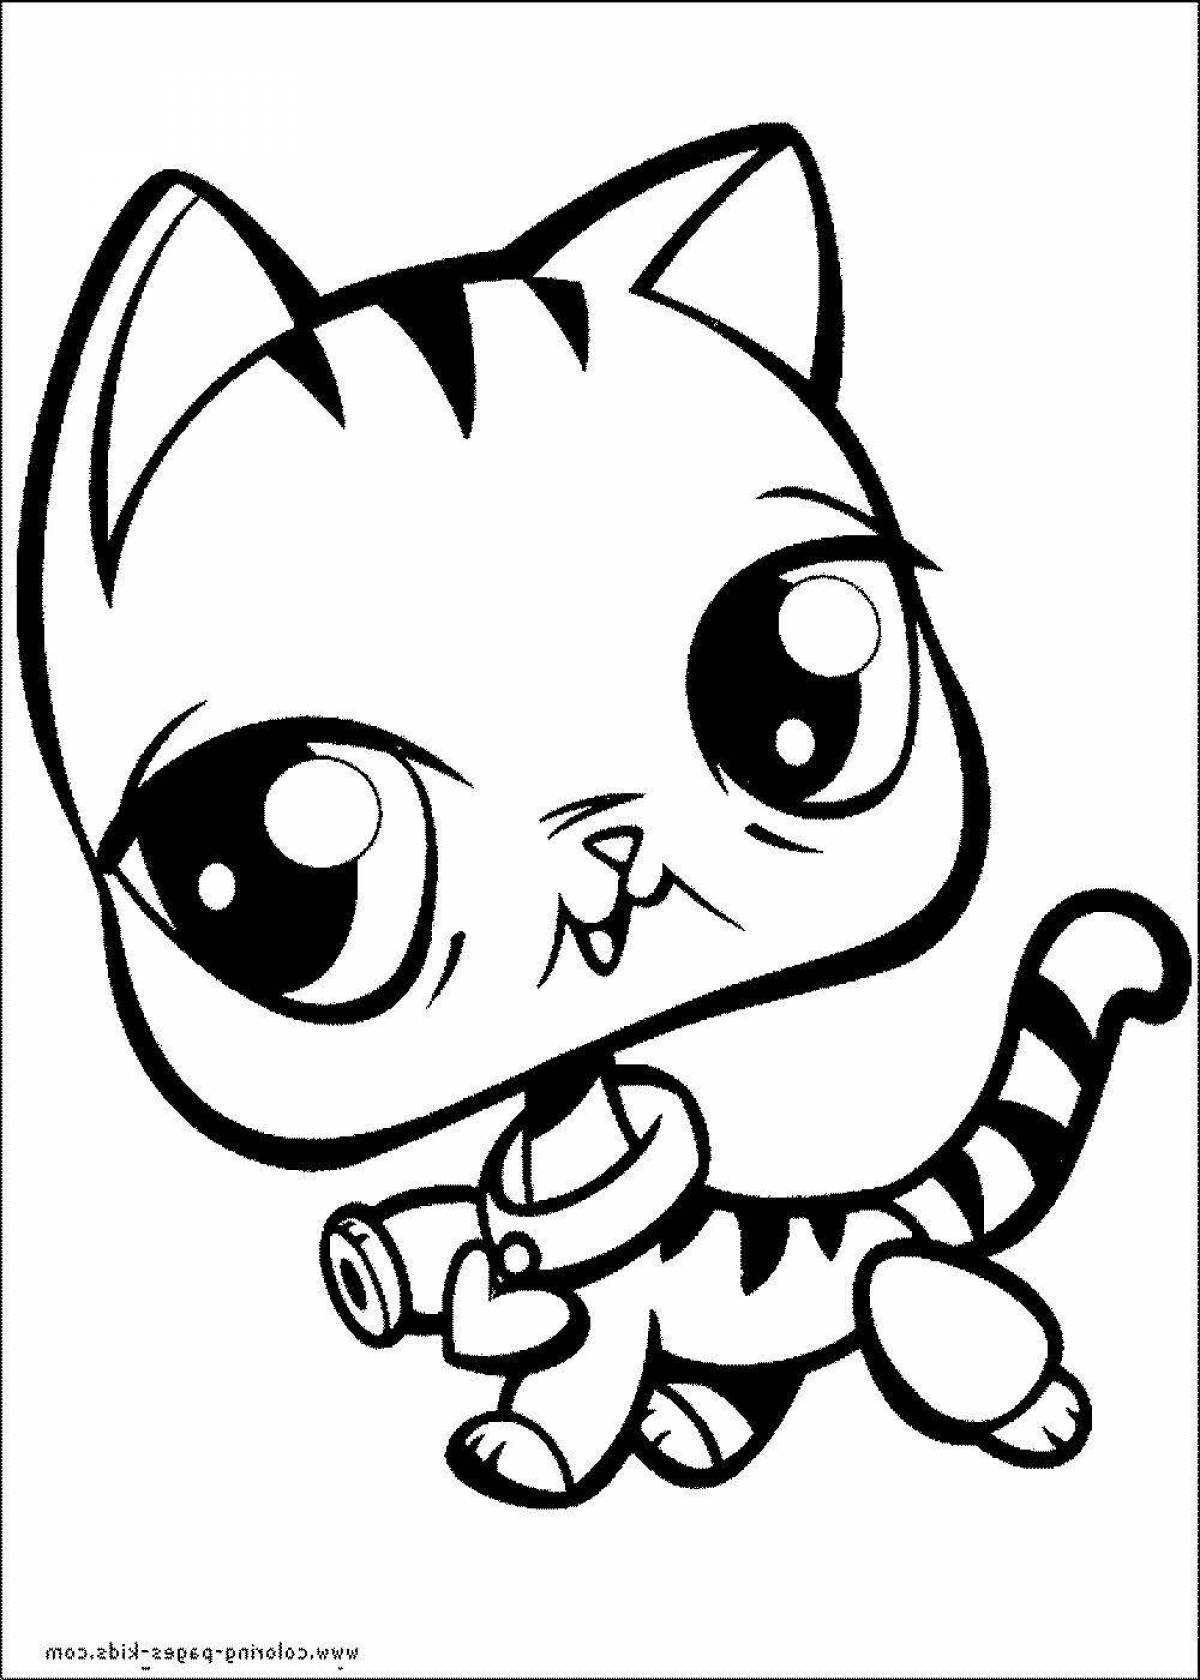 Curious kitten chi coloring book